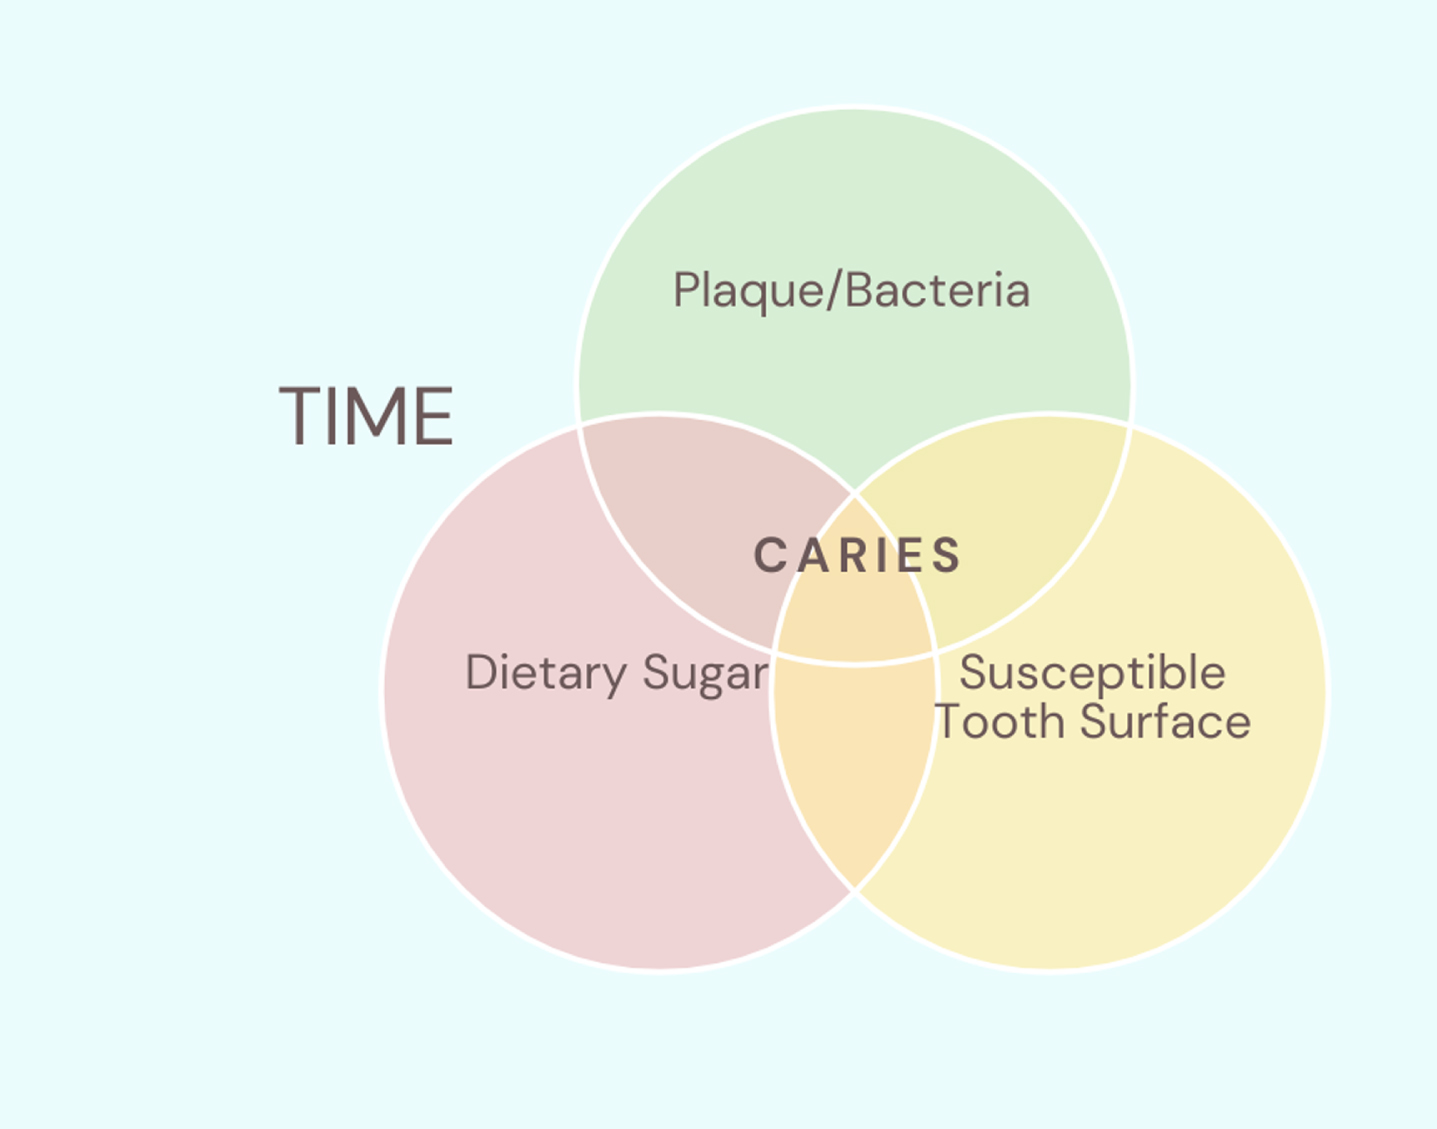 A simplified visual representation of the multifactorial aetiology of dental caries. Dietary sugars are metabolized by bacteria present in dental biofilms, generating acidic by-products that can lead to caries. The fourth factor that this disease process depends on is time, i.e. that it will take time for this process to occur.